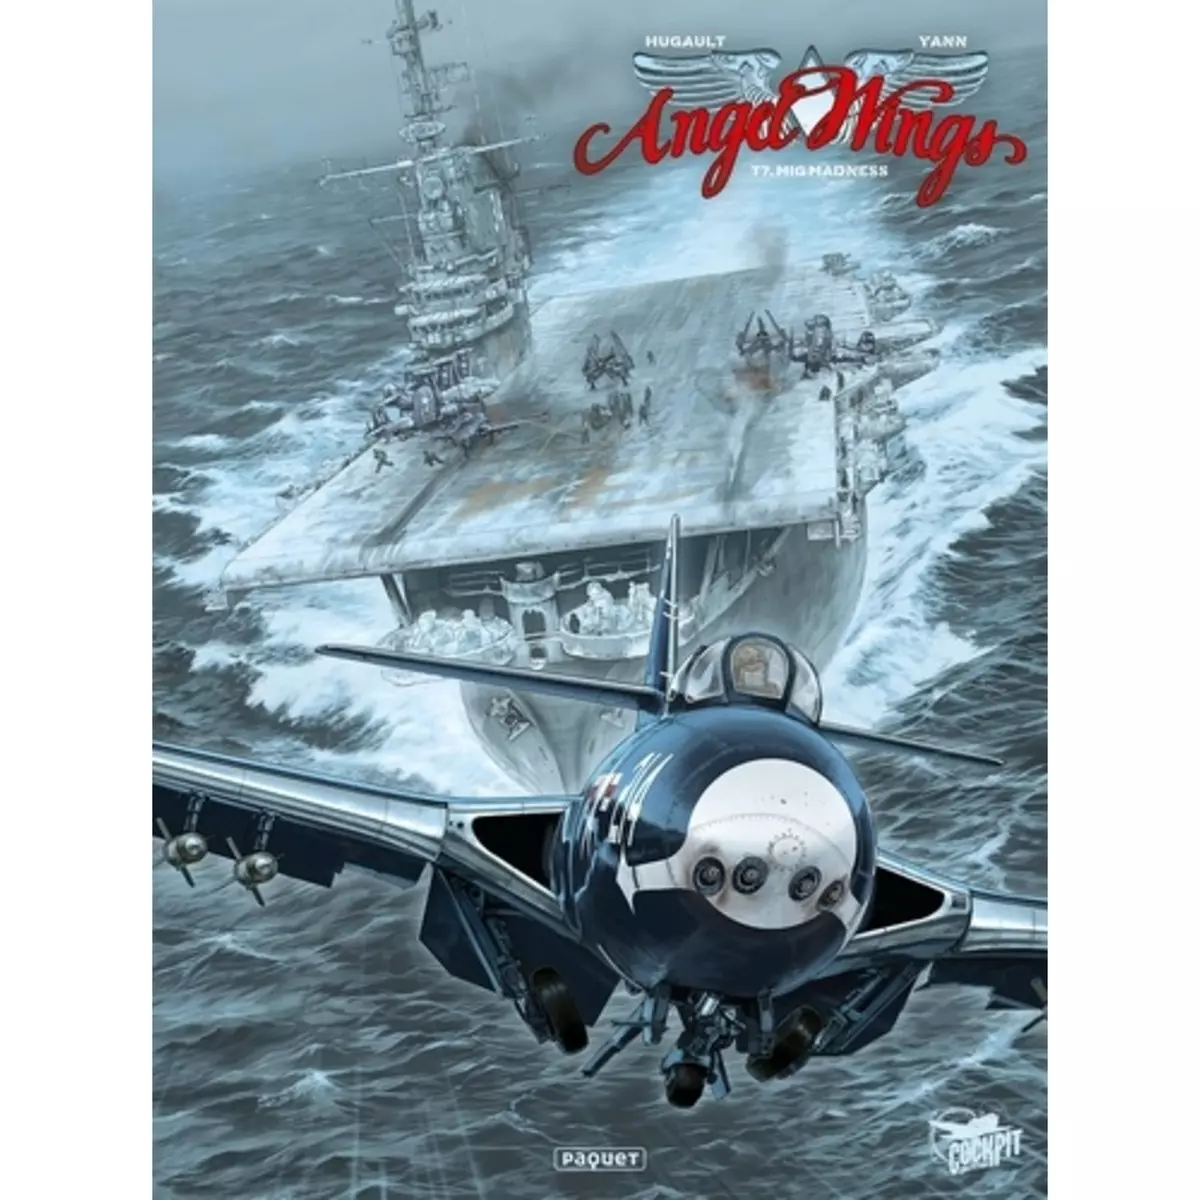  ANGEL WINGS TOME 7 : MIG MADNESS, Yann